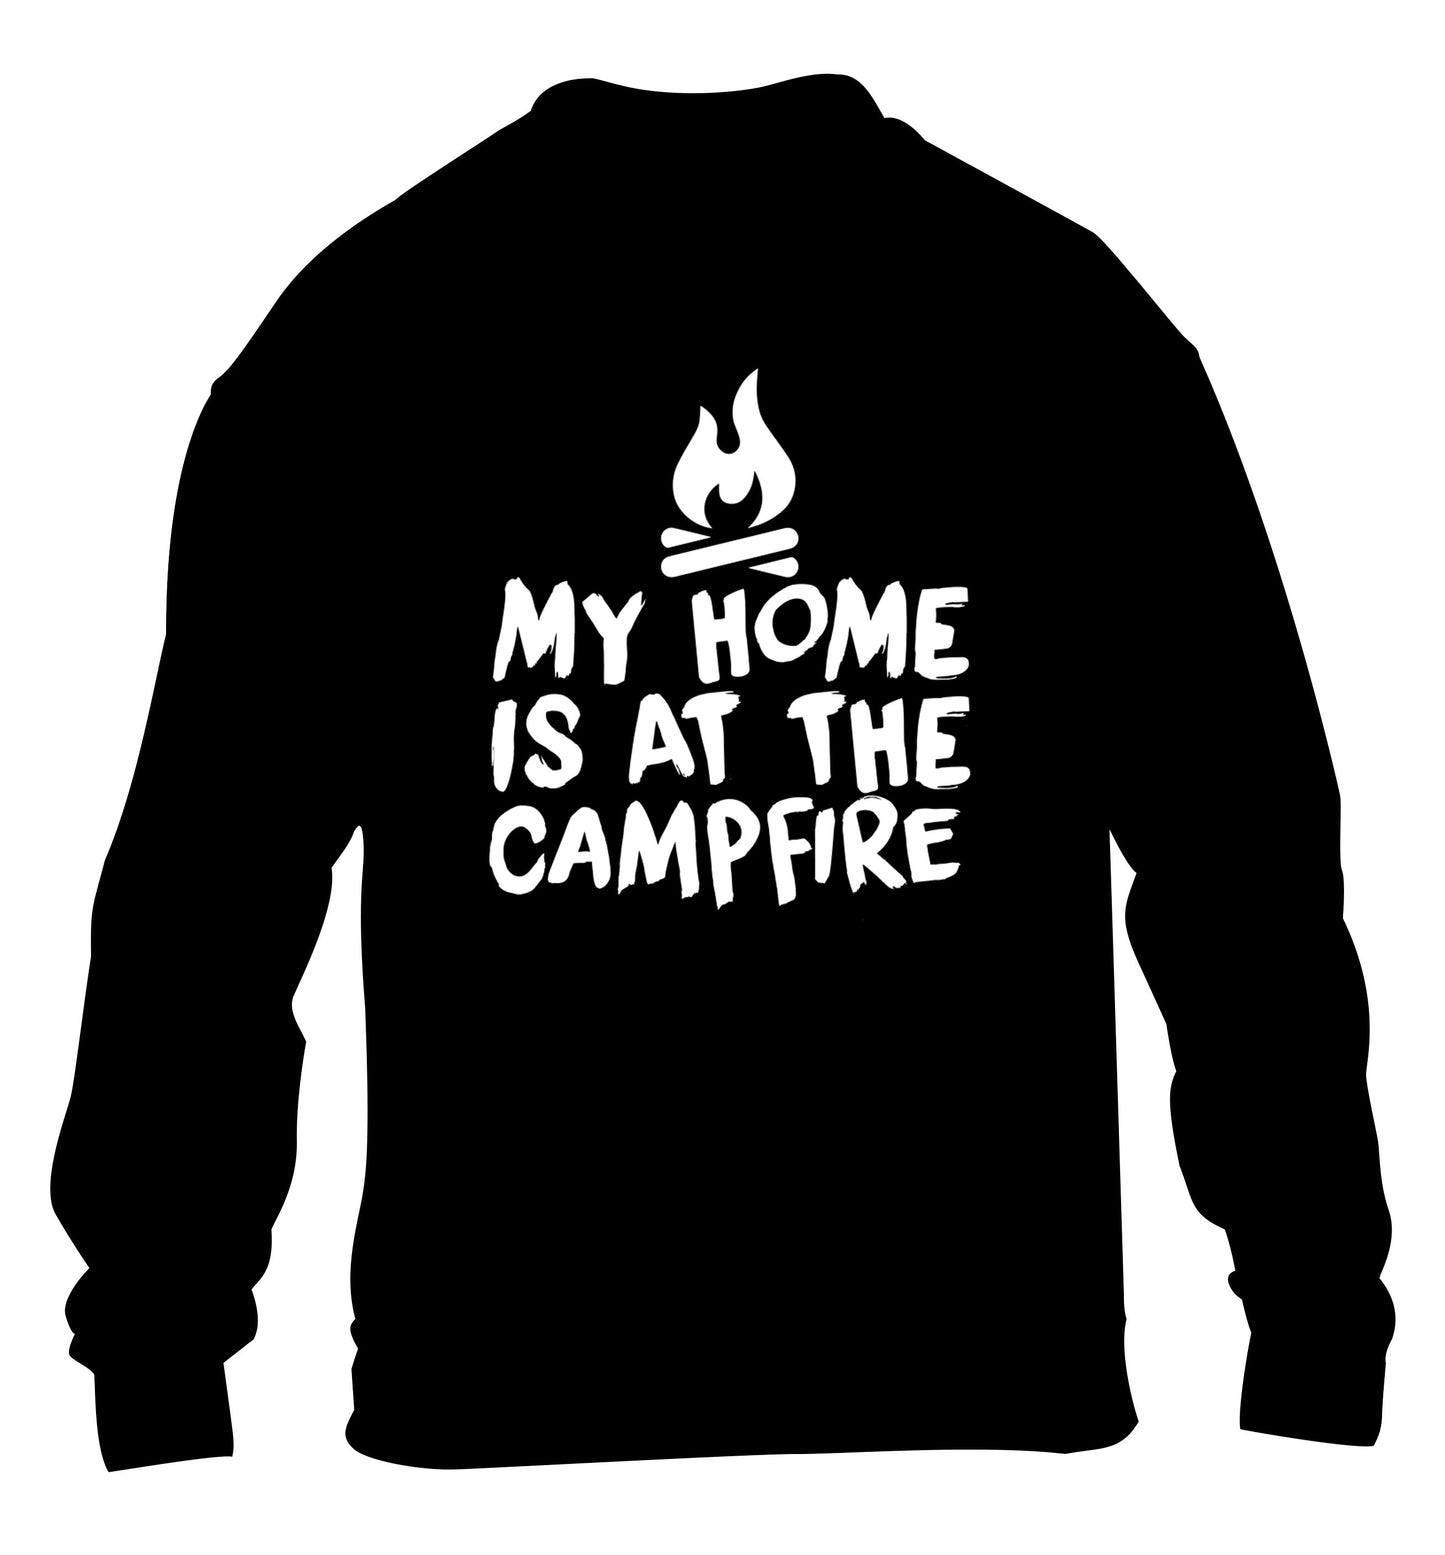 My home is at the campfire children's black sweater 12-14 Years